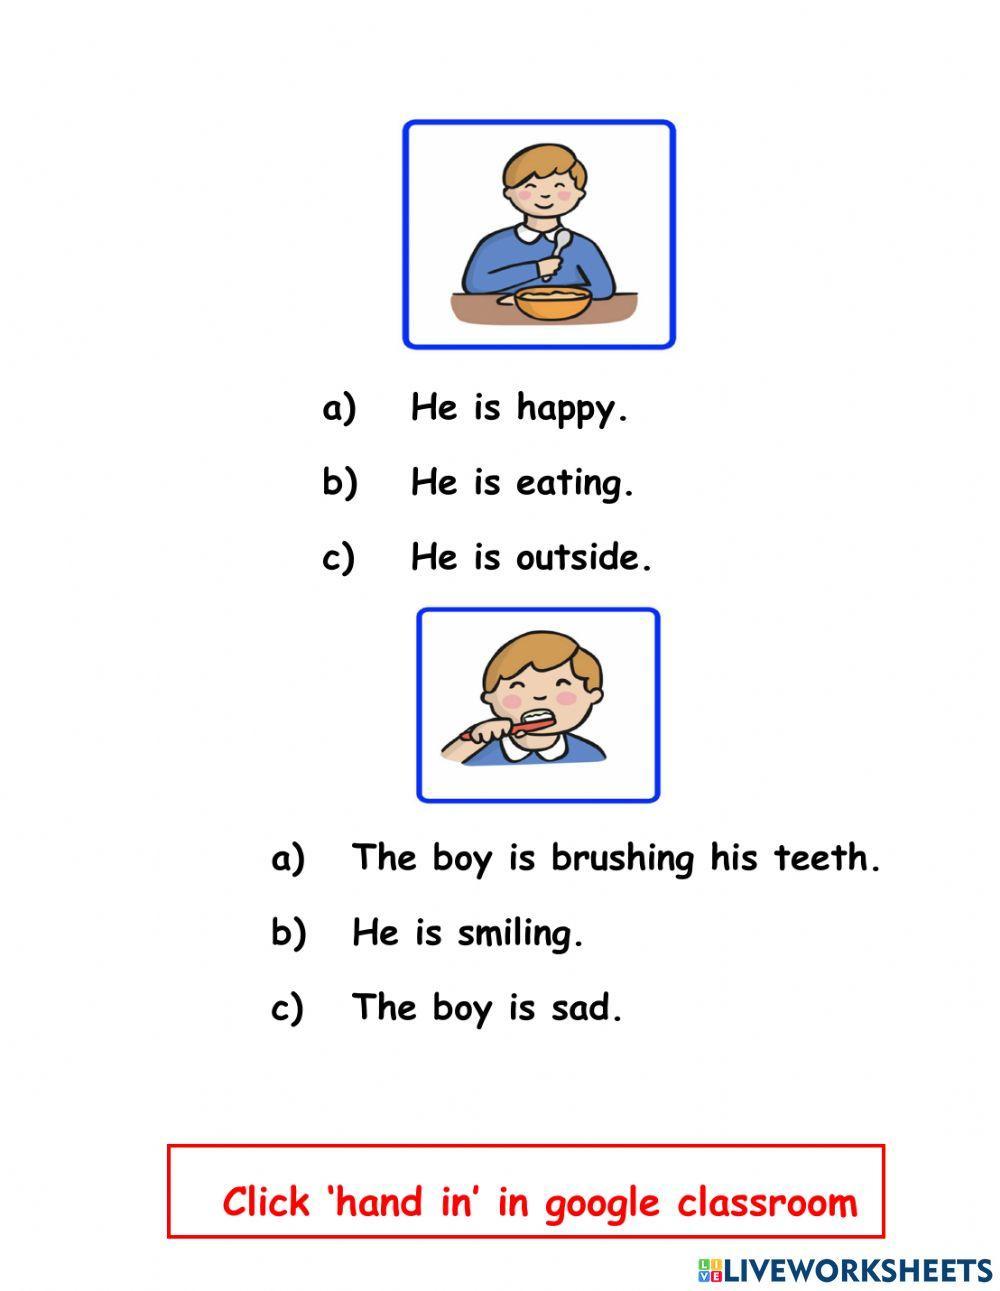 Picture & Sentence Sequencing